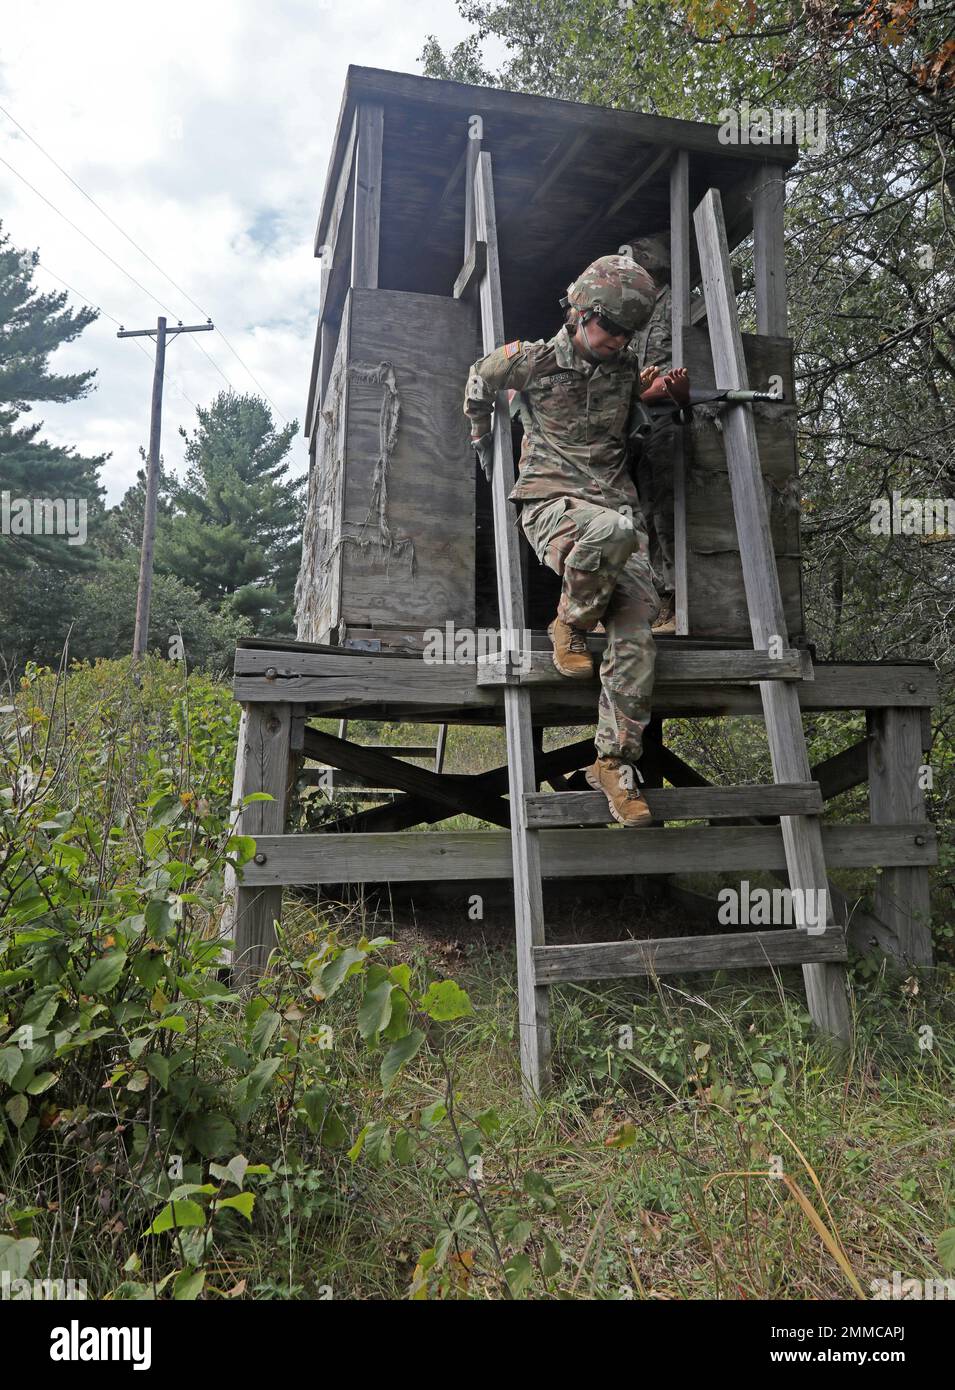 U.S. Army Reserve Spc. Ashley Carson, assigned to the 452nd Combat Support Hospital, 807th Medical Command (Deployment Support) based in Milwaukee, grabs a guard shack ladder rail as she carefully steps on the ladder rungs while holding a collapsible litter carrying a 'casualty' held by two other Soldiers during a litter obstacle course on Fort McCoy, Wis., Sept. 16, 2022. Stock Photo